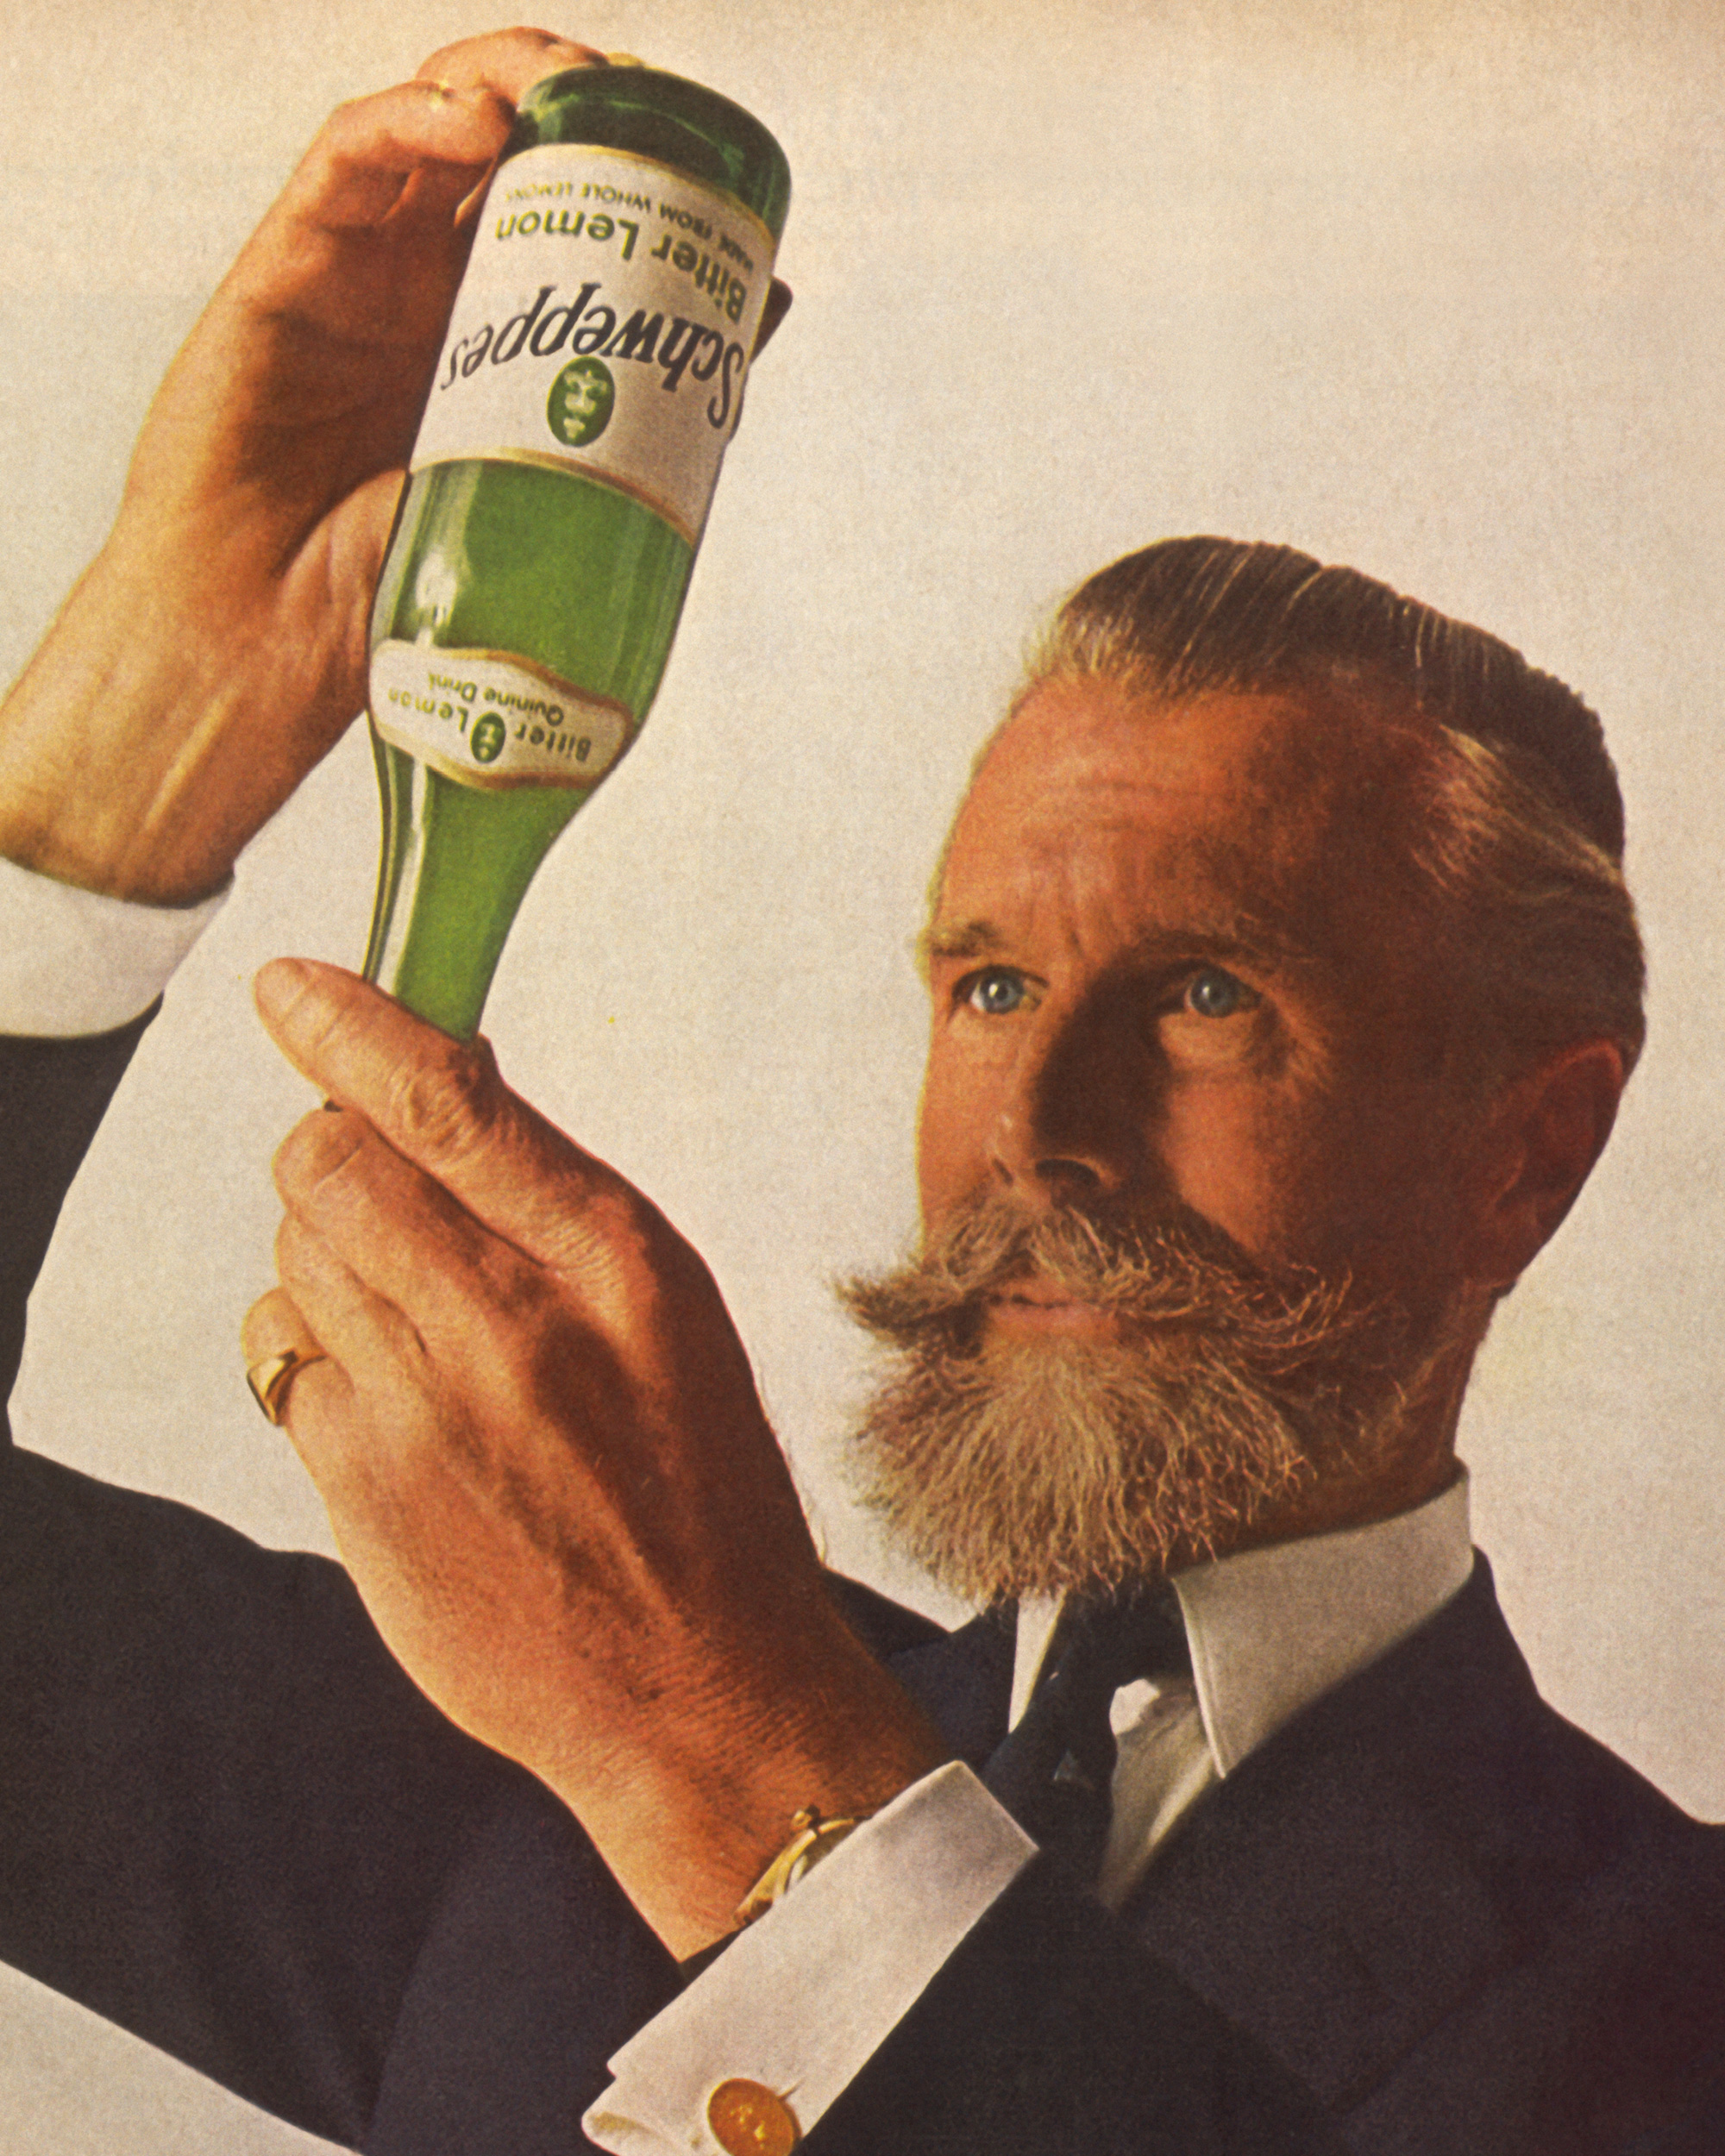 A June 11th nineteen sixty-five Schweppes ad in Time magazine. The ad depicts the president of the company, “Commander Whitehead,” inspecting the bubbles in a bottle of Schweppes bitter lemon.